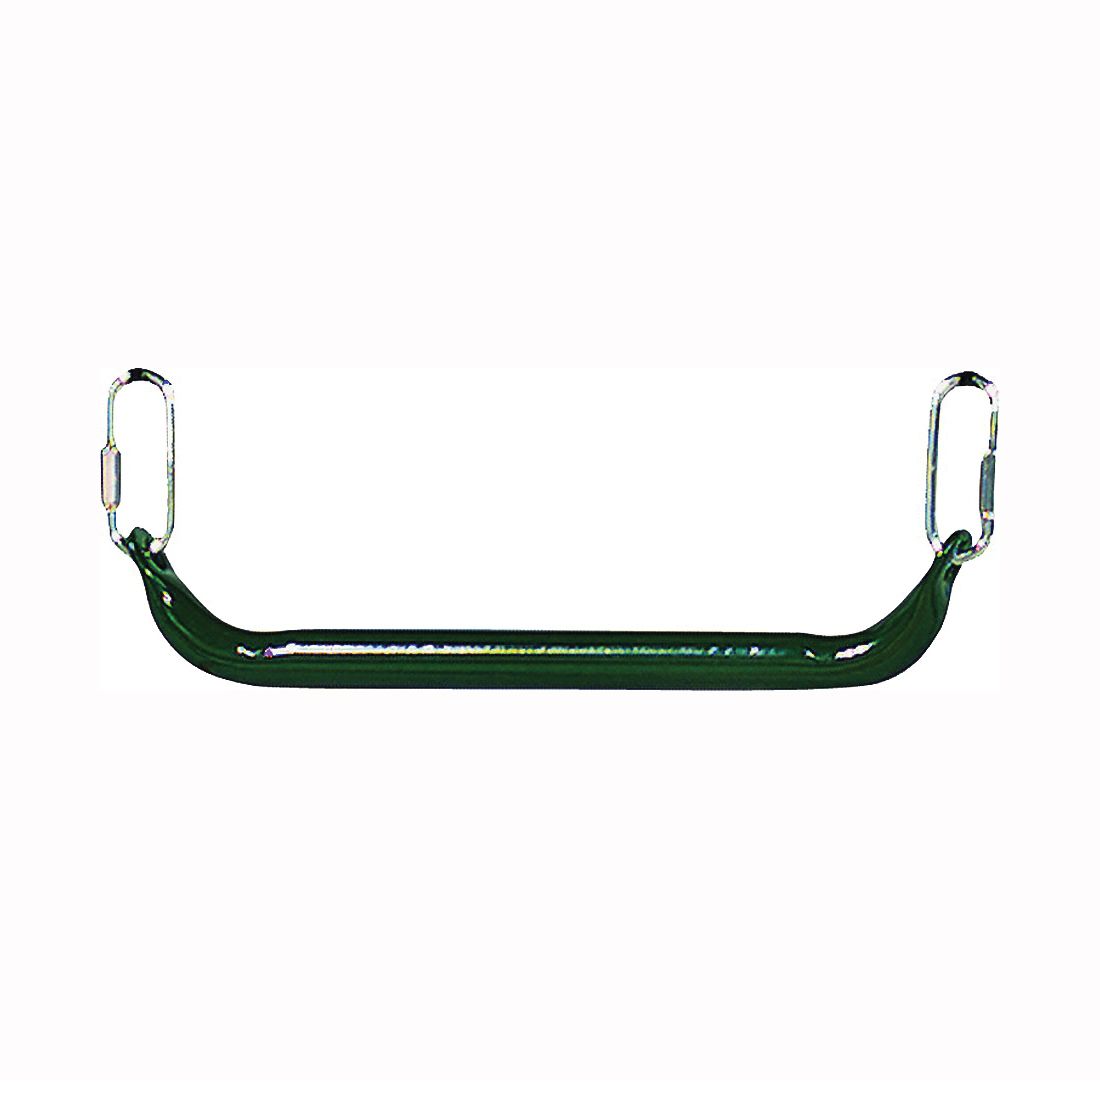 PS 7538 Trapeze Bar, Steel, Green, Rubber-Coated